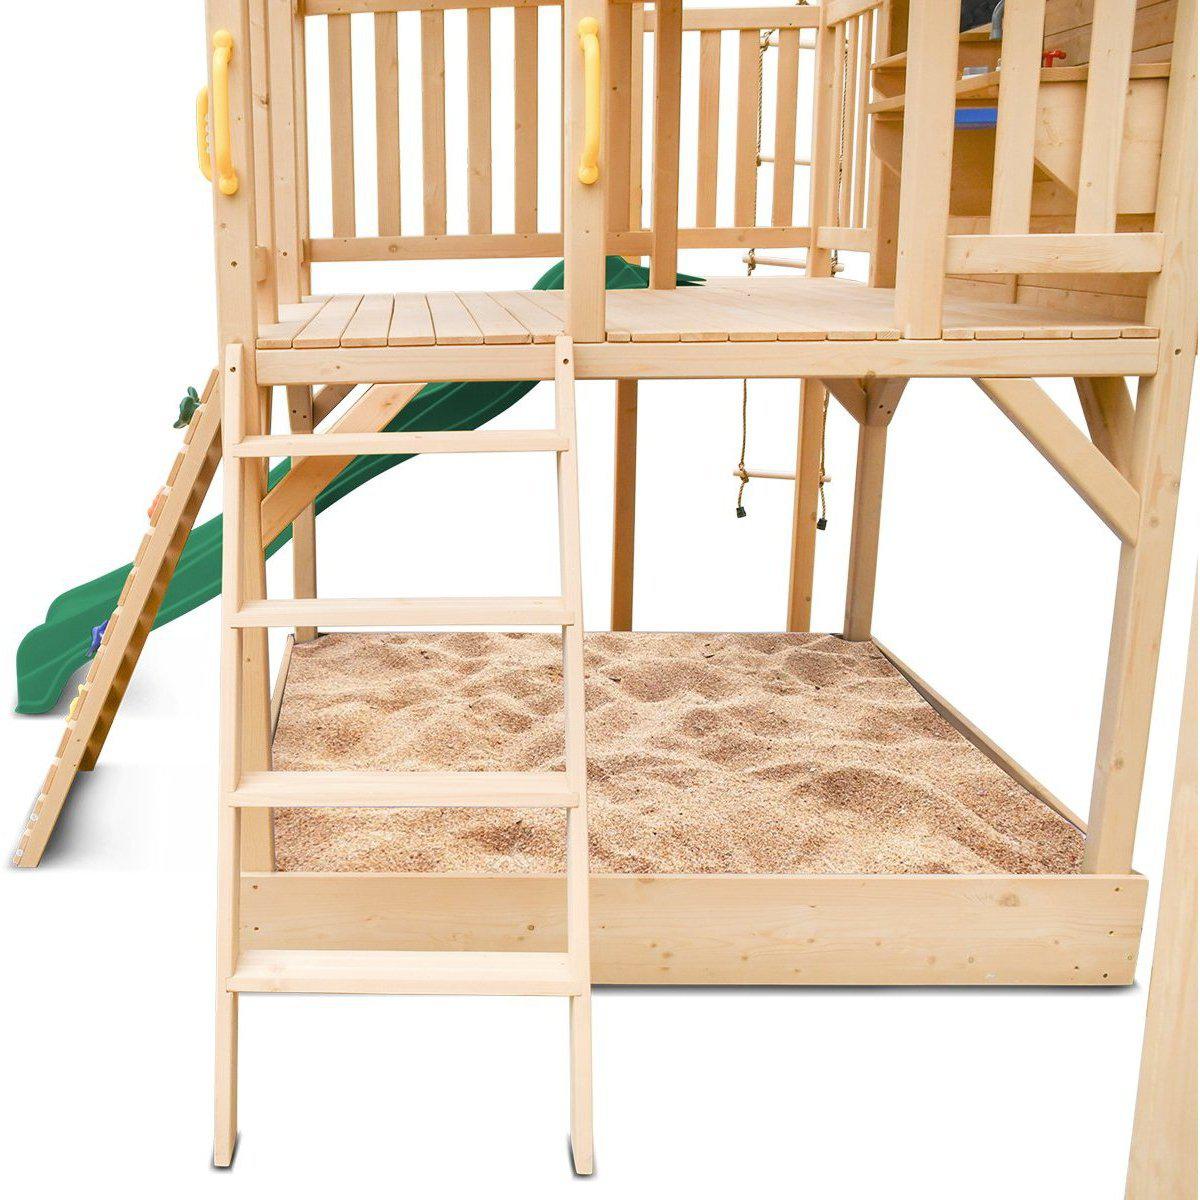 Elevate Backyard Play: Kingston Cubby House with Green Slide